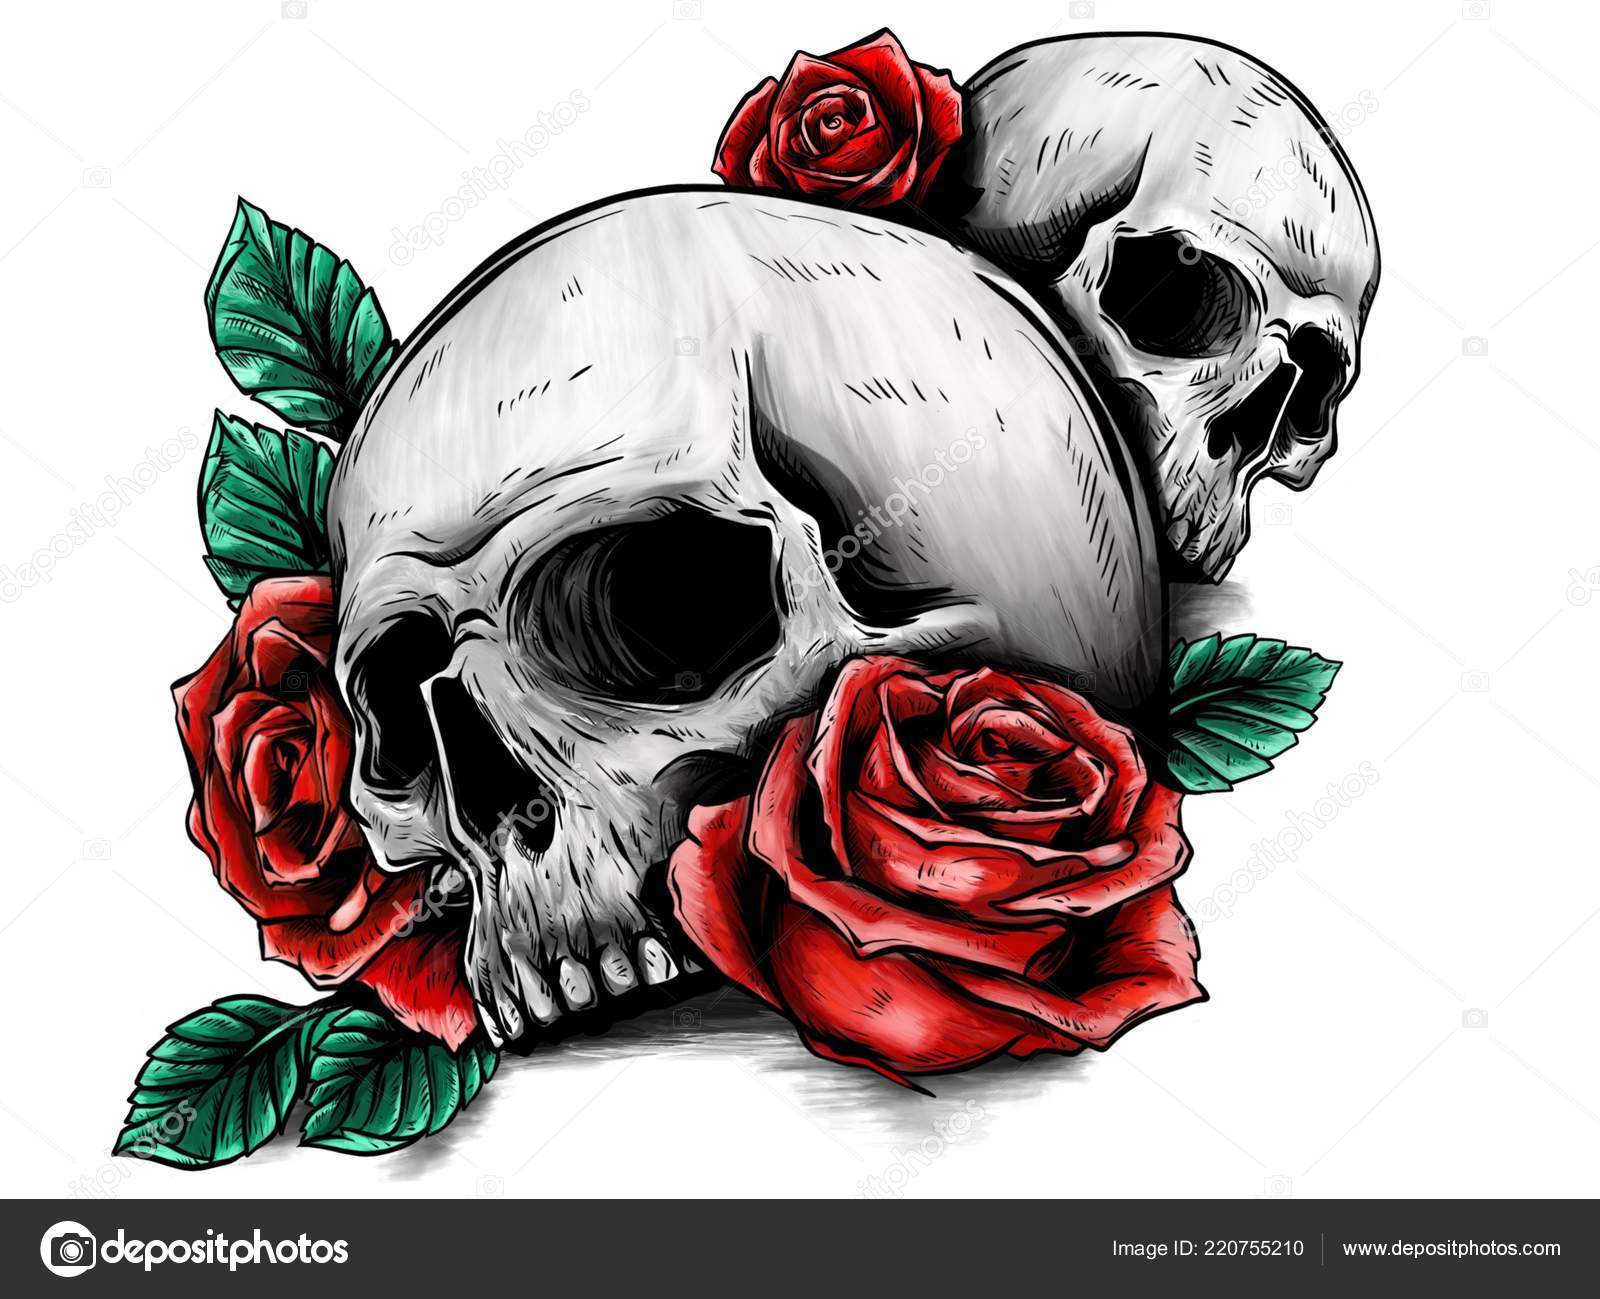 Featured image of post Cool Rose Drawings Of Skulls - You can draw any flowers let&#039;s put the skull drawing aside for a moment, and pay attention to some useful exercises.